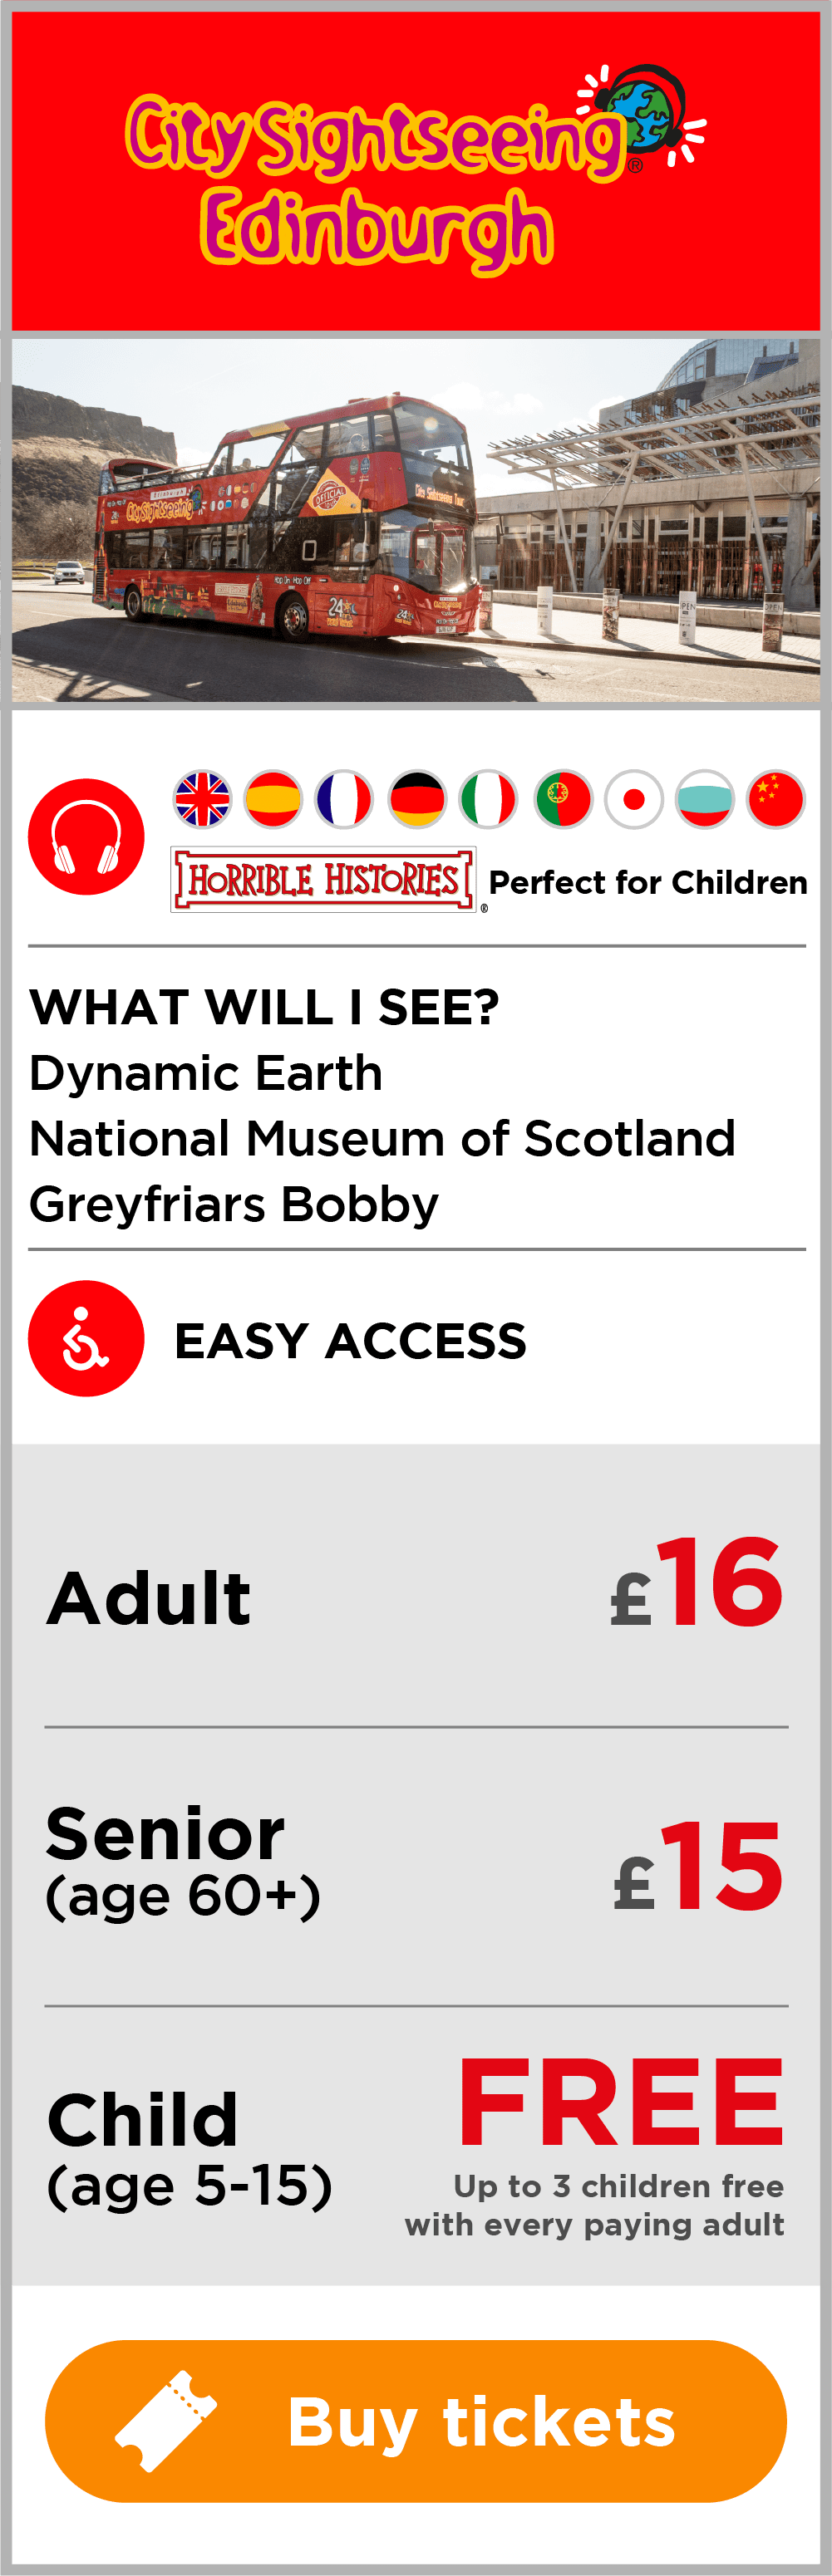 CitySightseeing Tour includes Dynamic Earth National Museum of Scotland Greyfriars Bobby. £16 adult and £15 senior ticket.